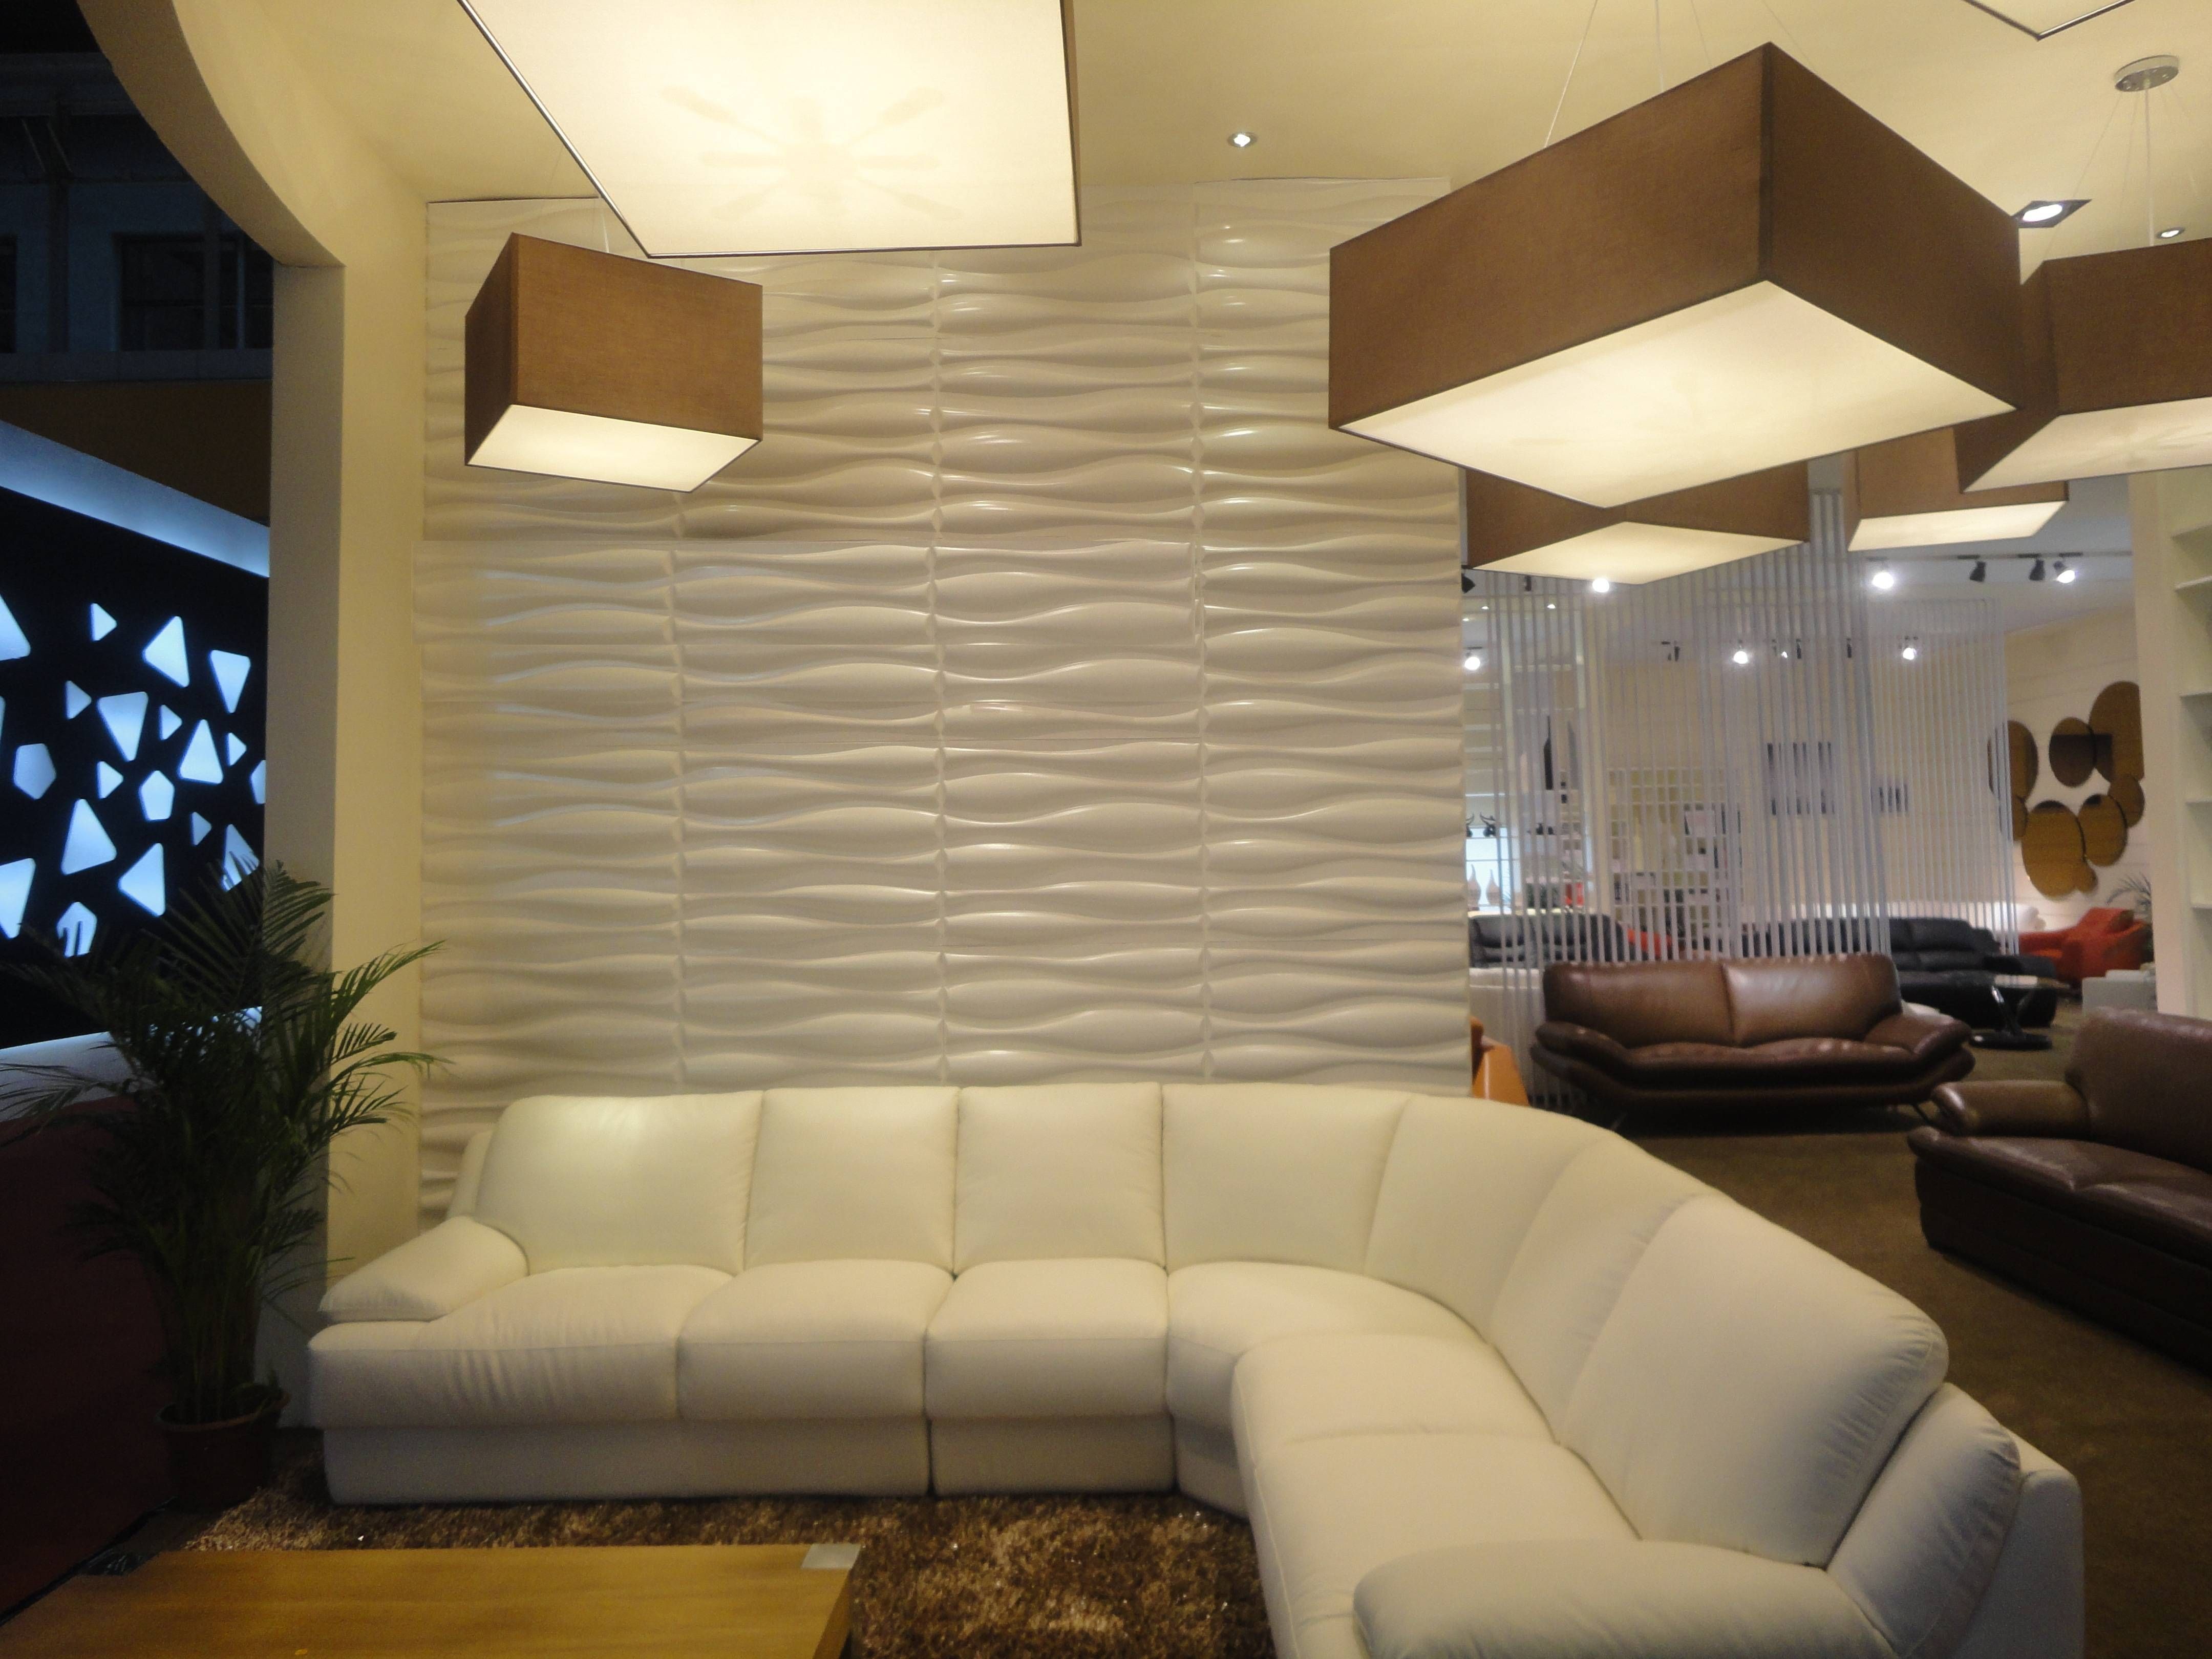 Pvc 3d Wall Panels Regarding Most Recently Released 3d Plastic Wall Panels (View 1 of 20)